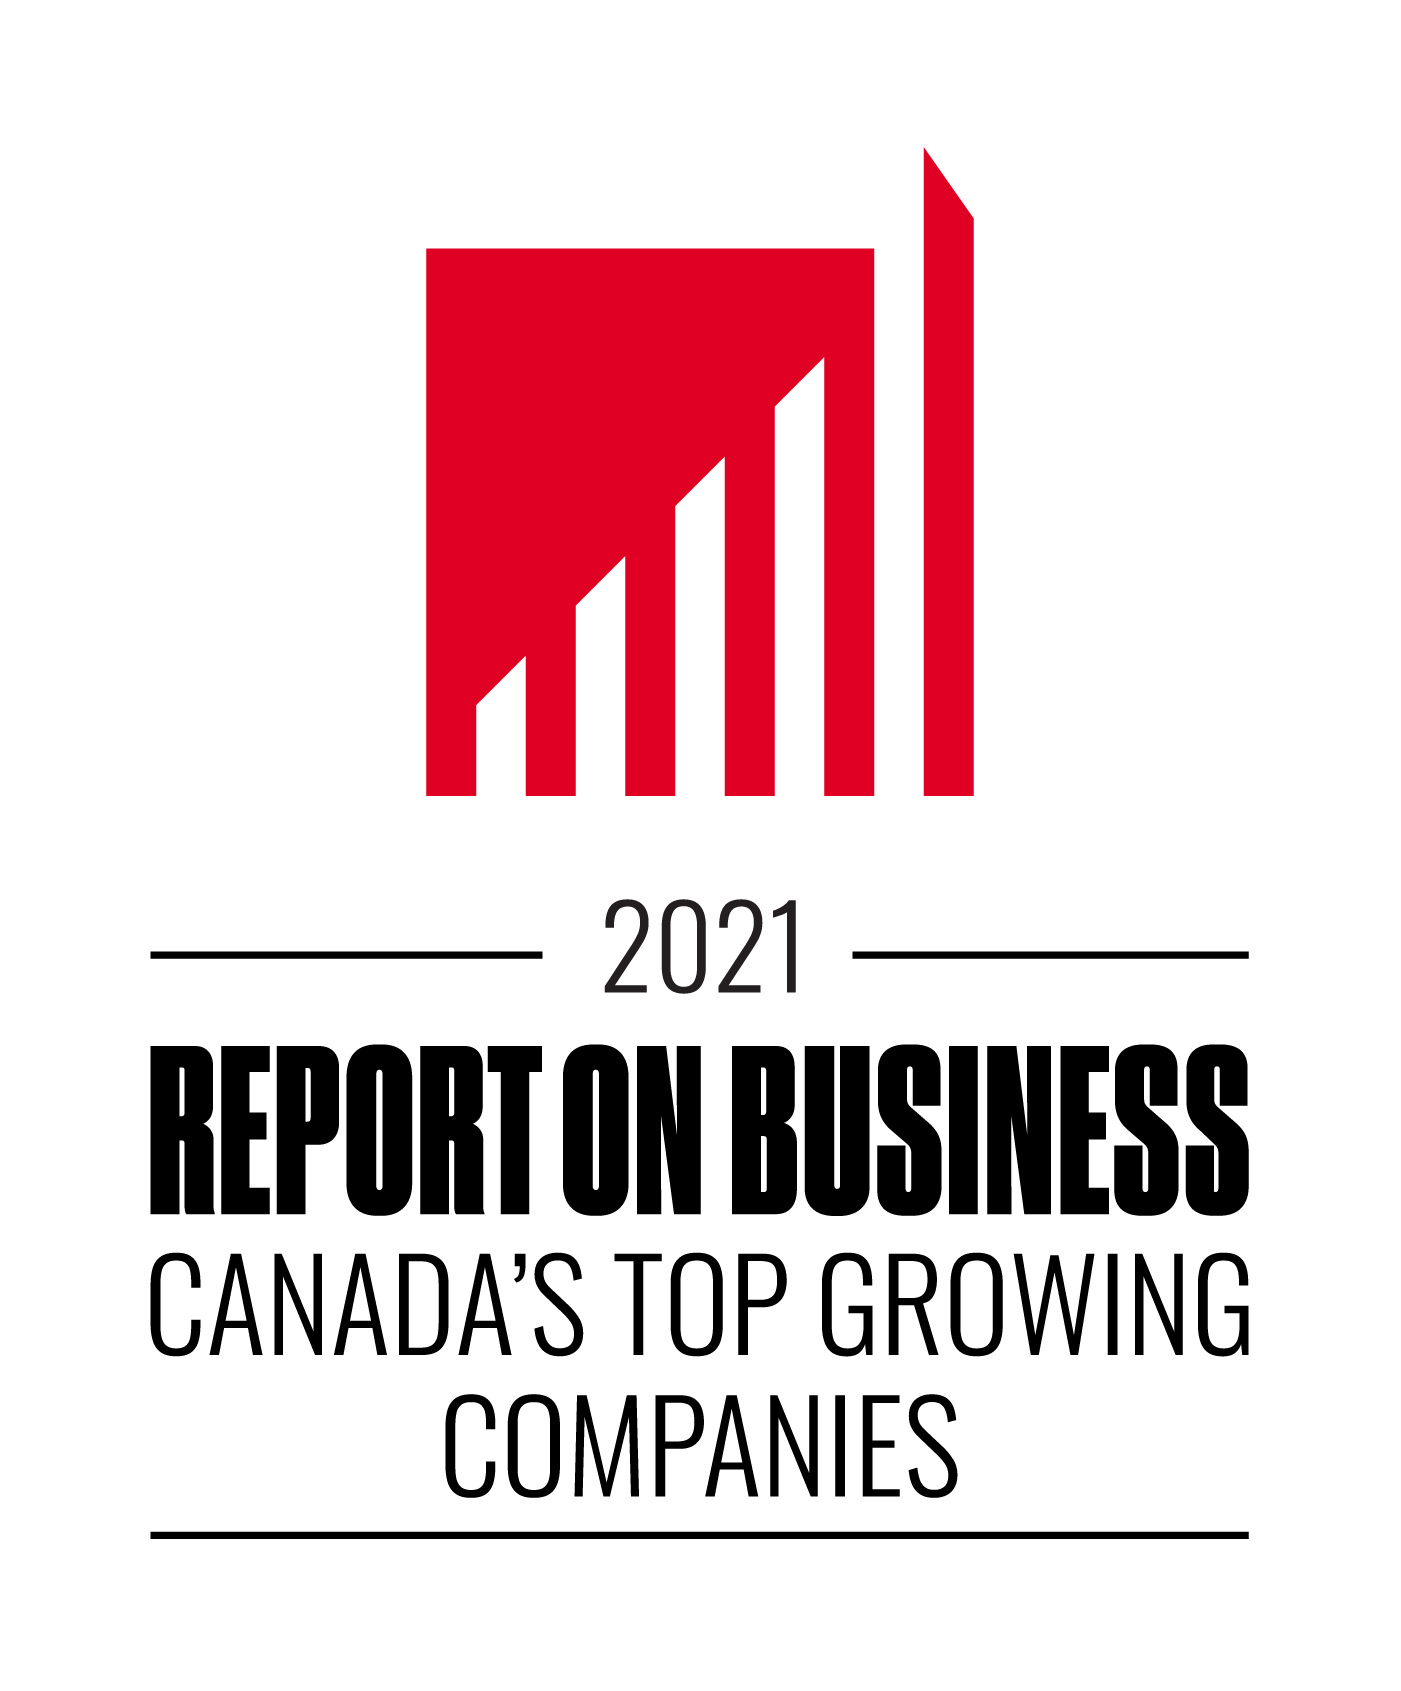 Globe and Mail Top Growing